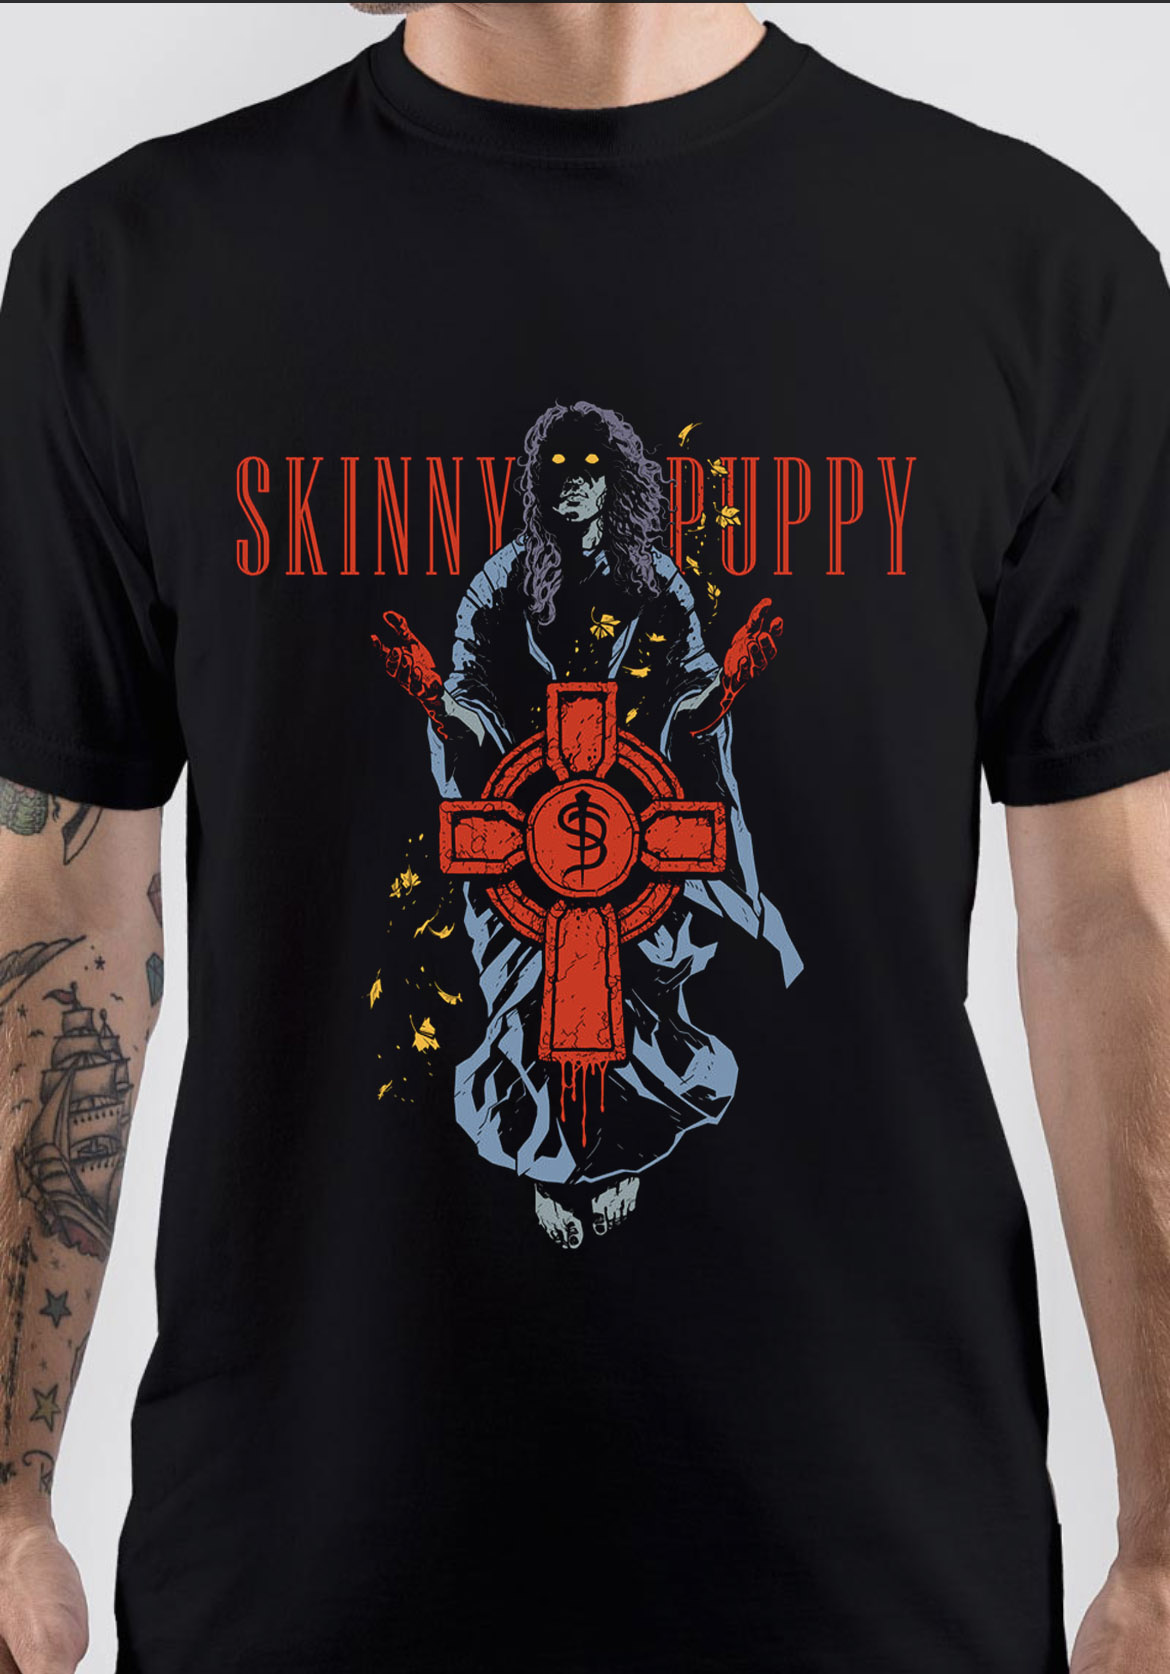 Skinny Puppy T-Shirt And Merchandise